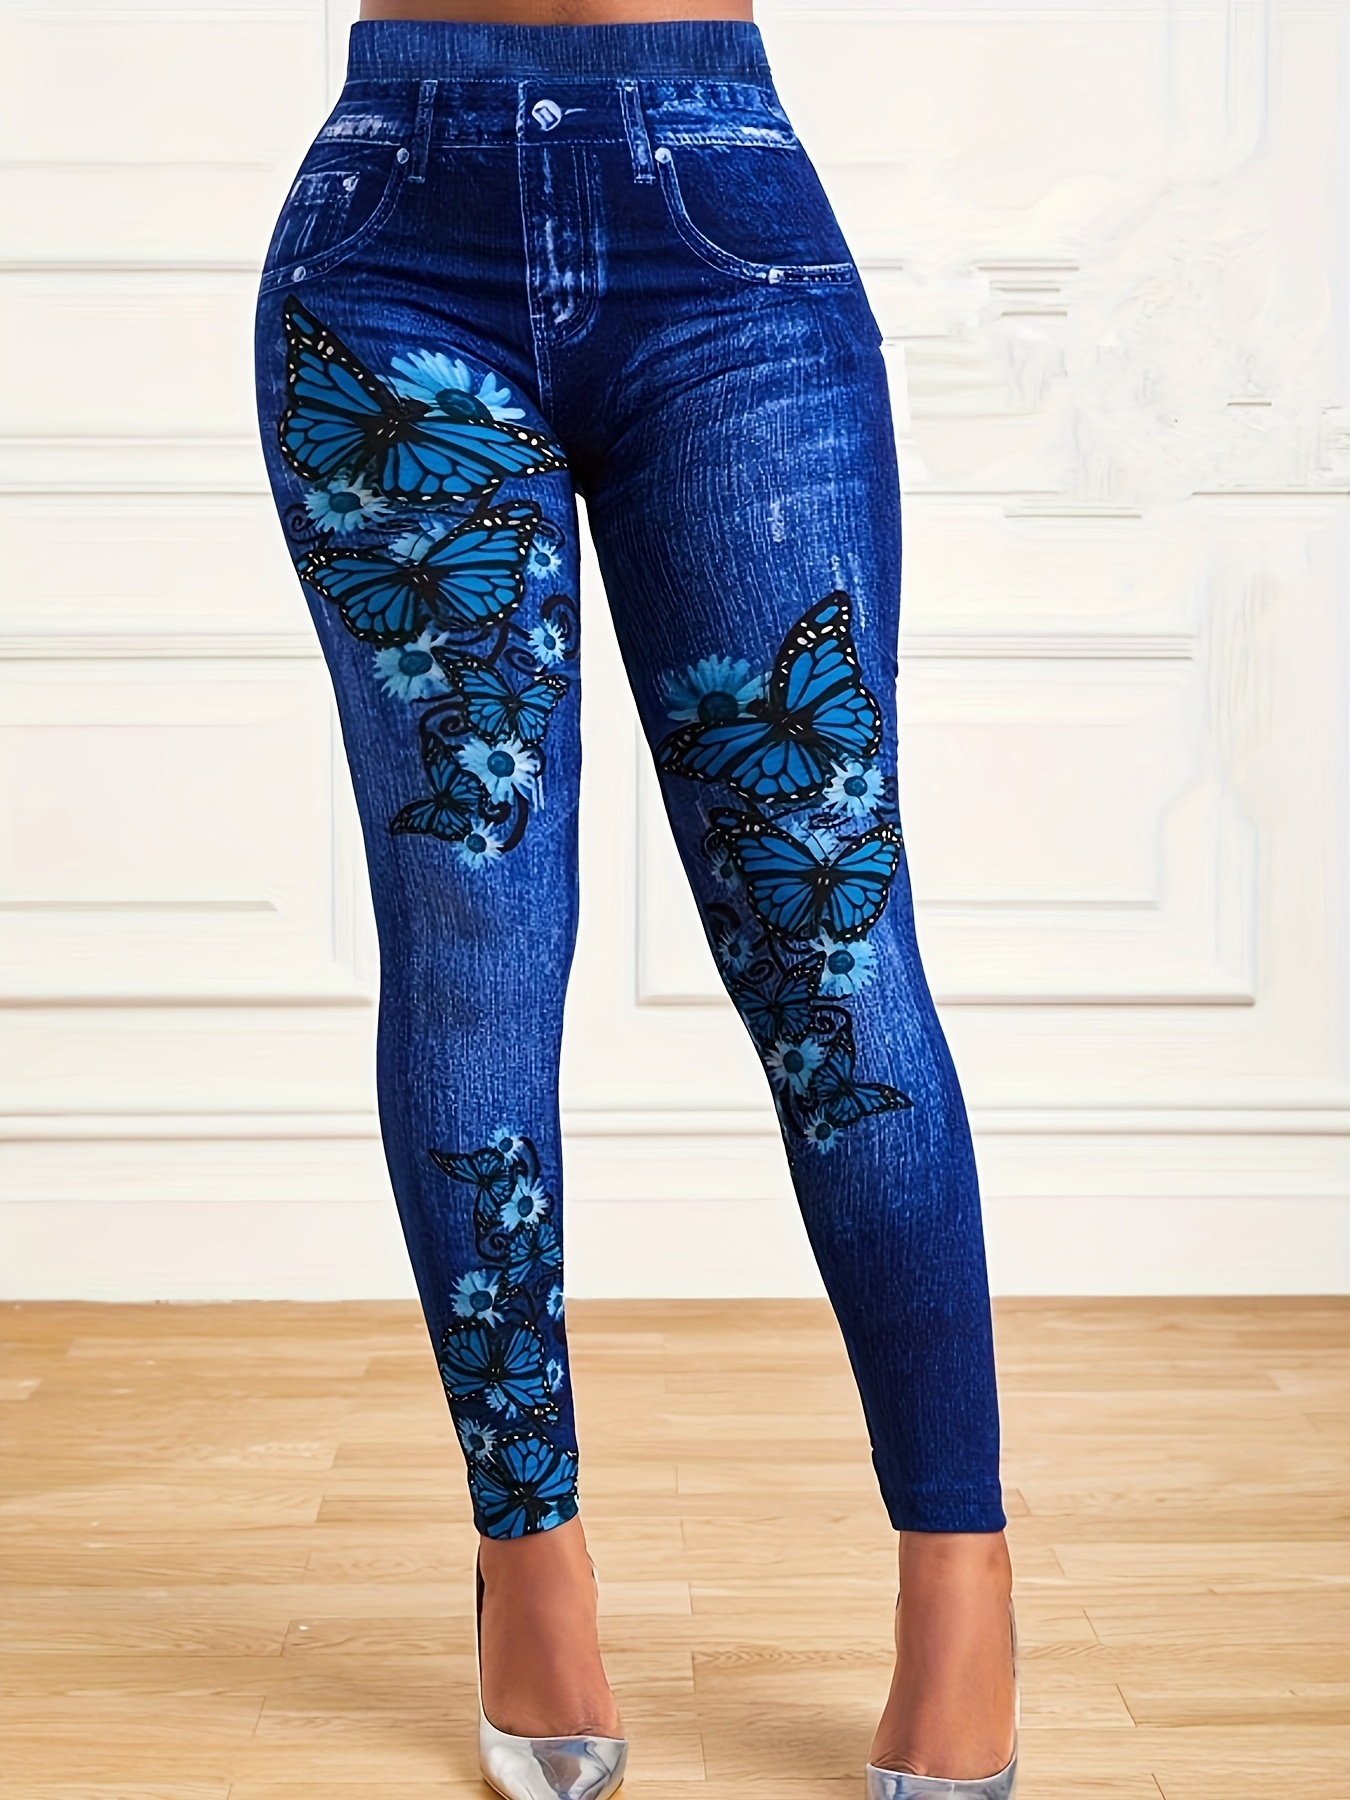 VOWUA Jean Leggings for Women Plus Size Butterfly Printed Denim High  Waisted Yoga Pants Stretch Jean Look Jeggings Tights, Black, Large at   Women's Clothing store